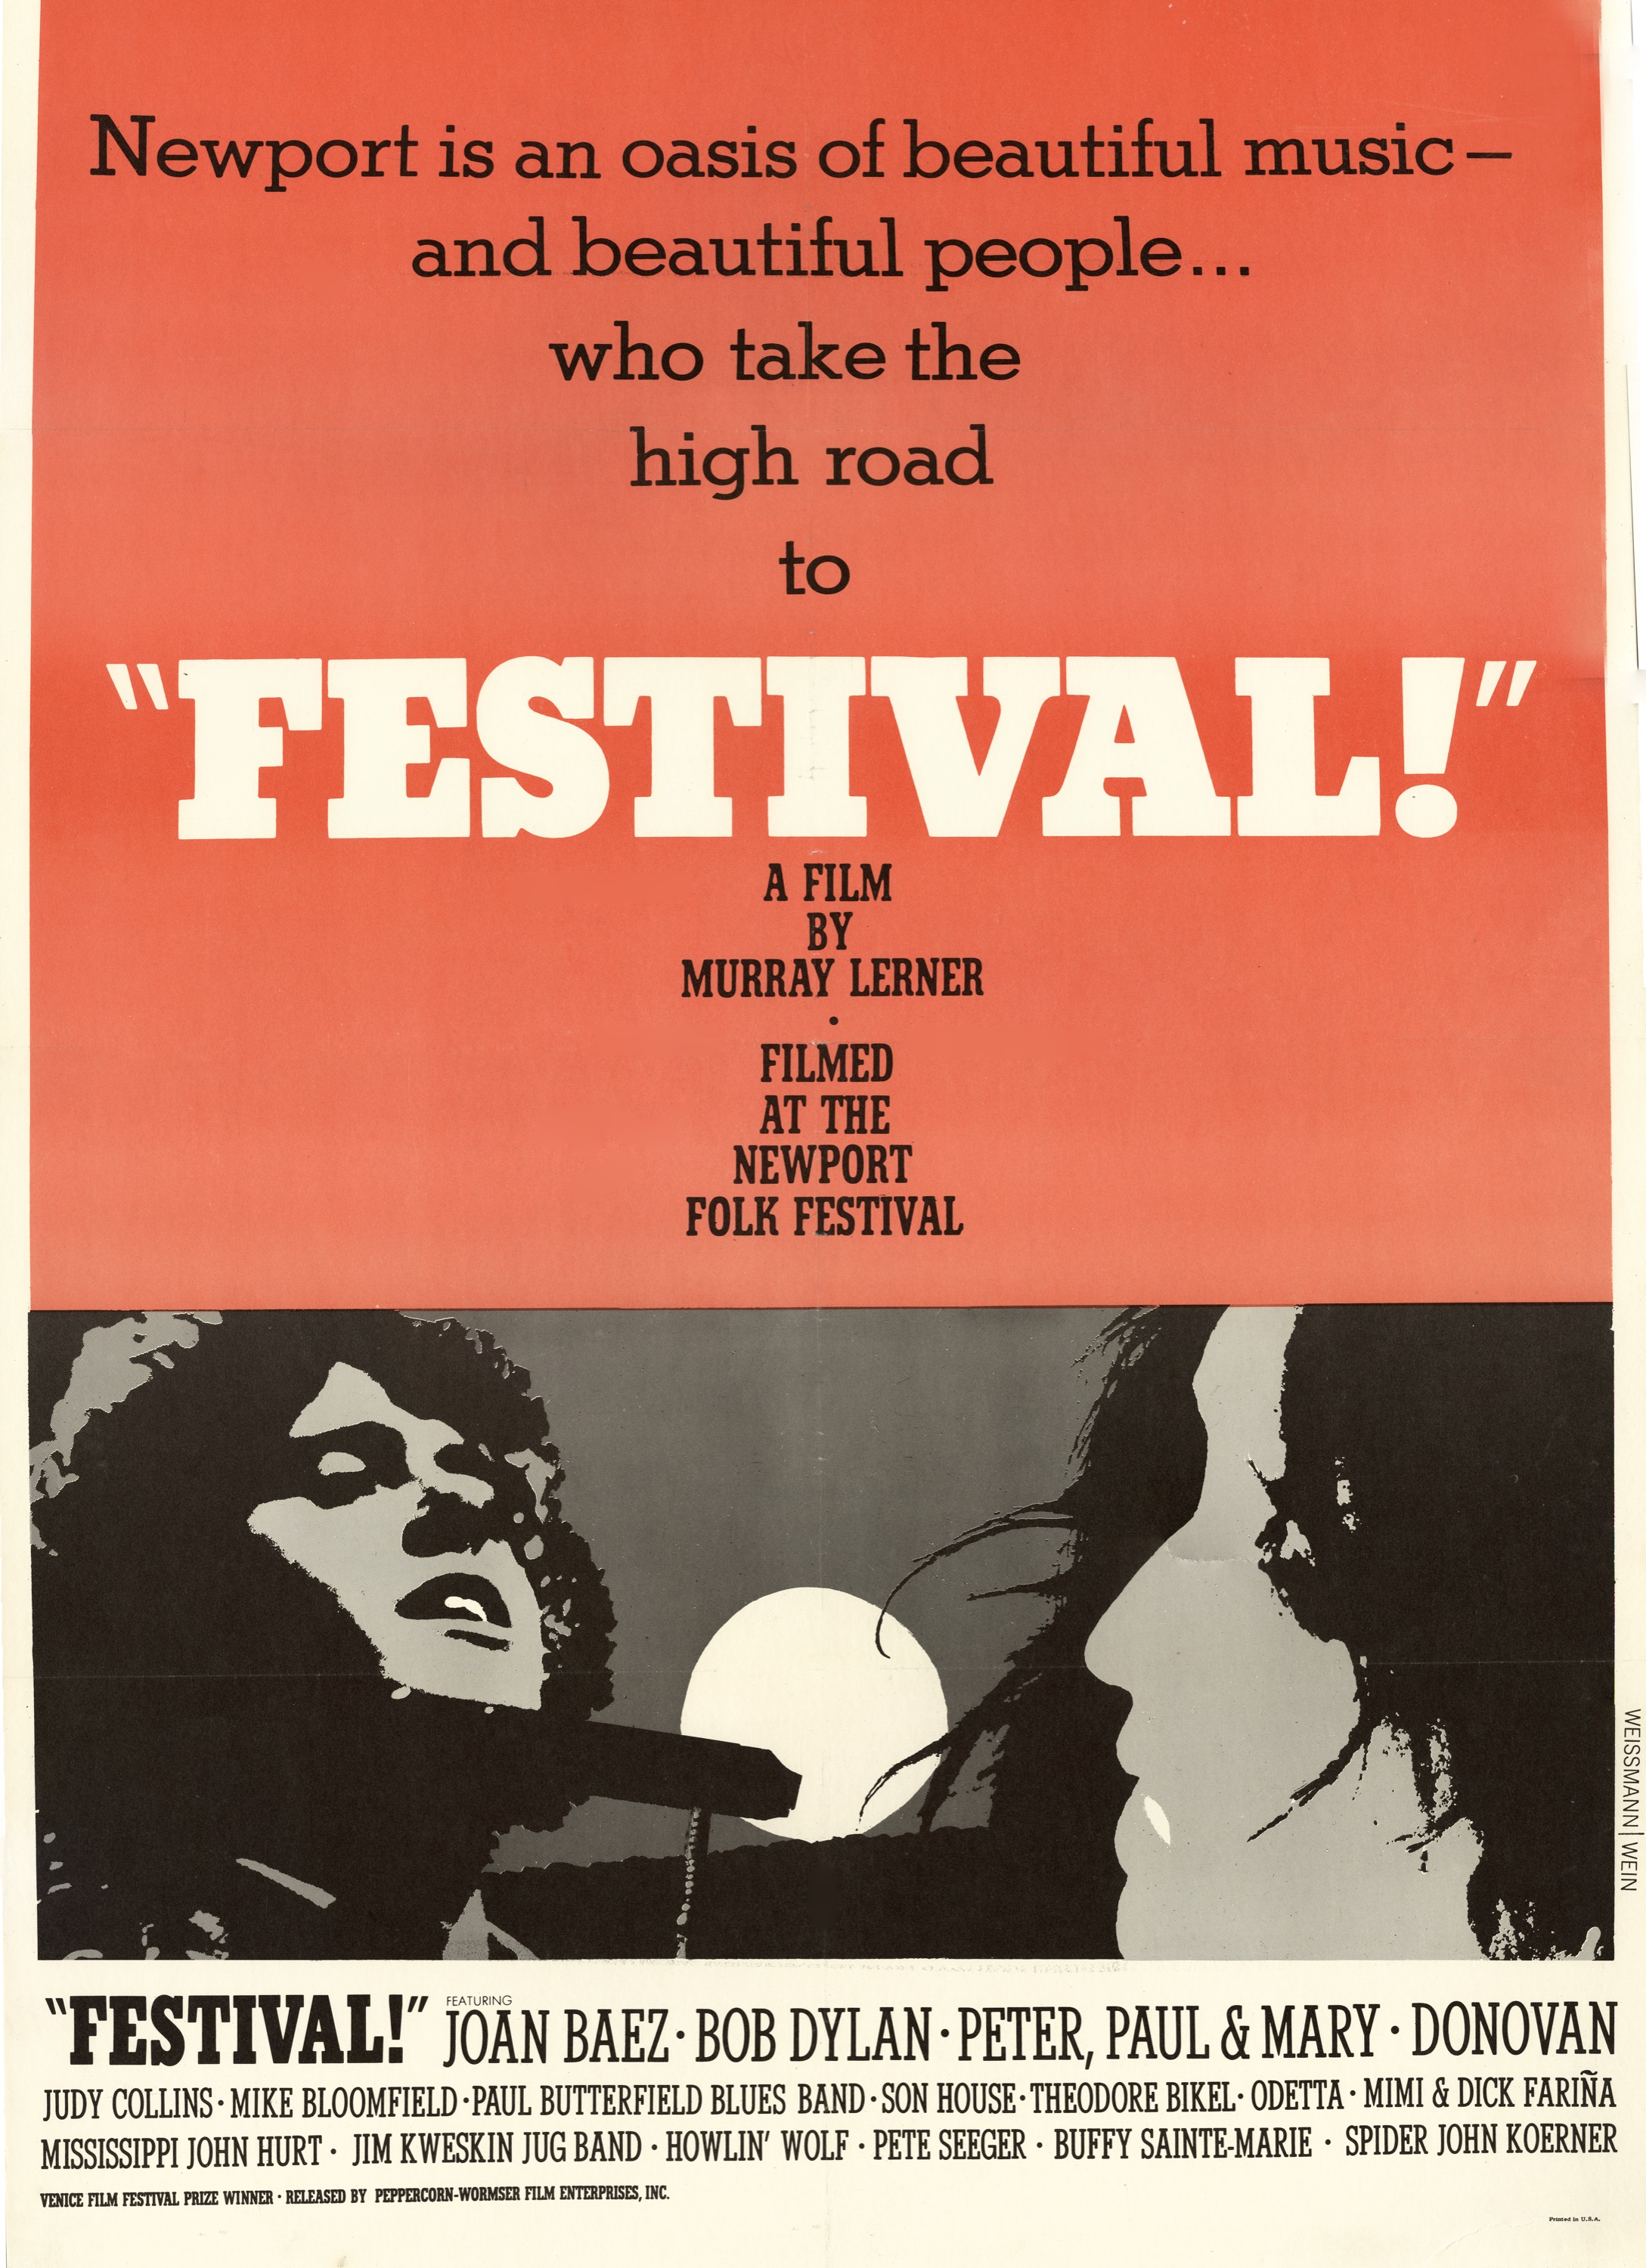 Murray Lerner;  September 12th re-release of Festival! by Criterion Collection